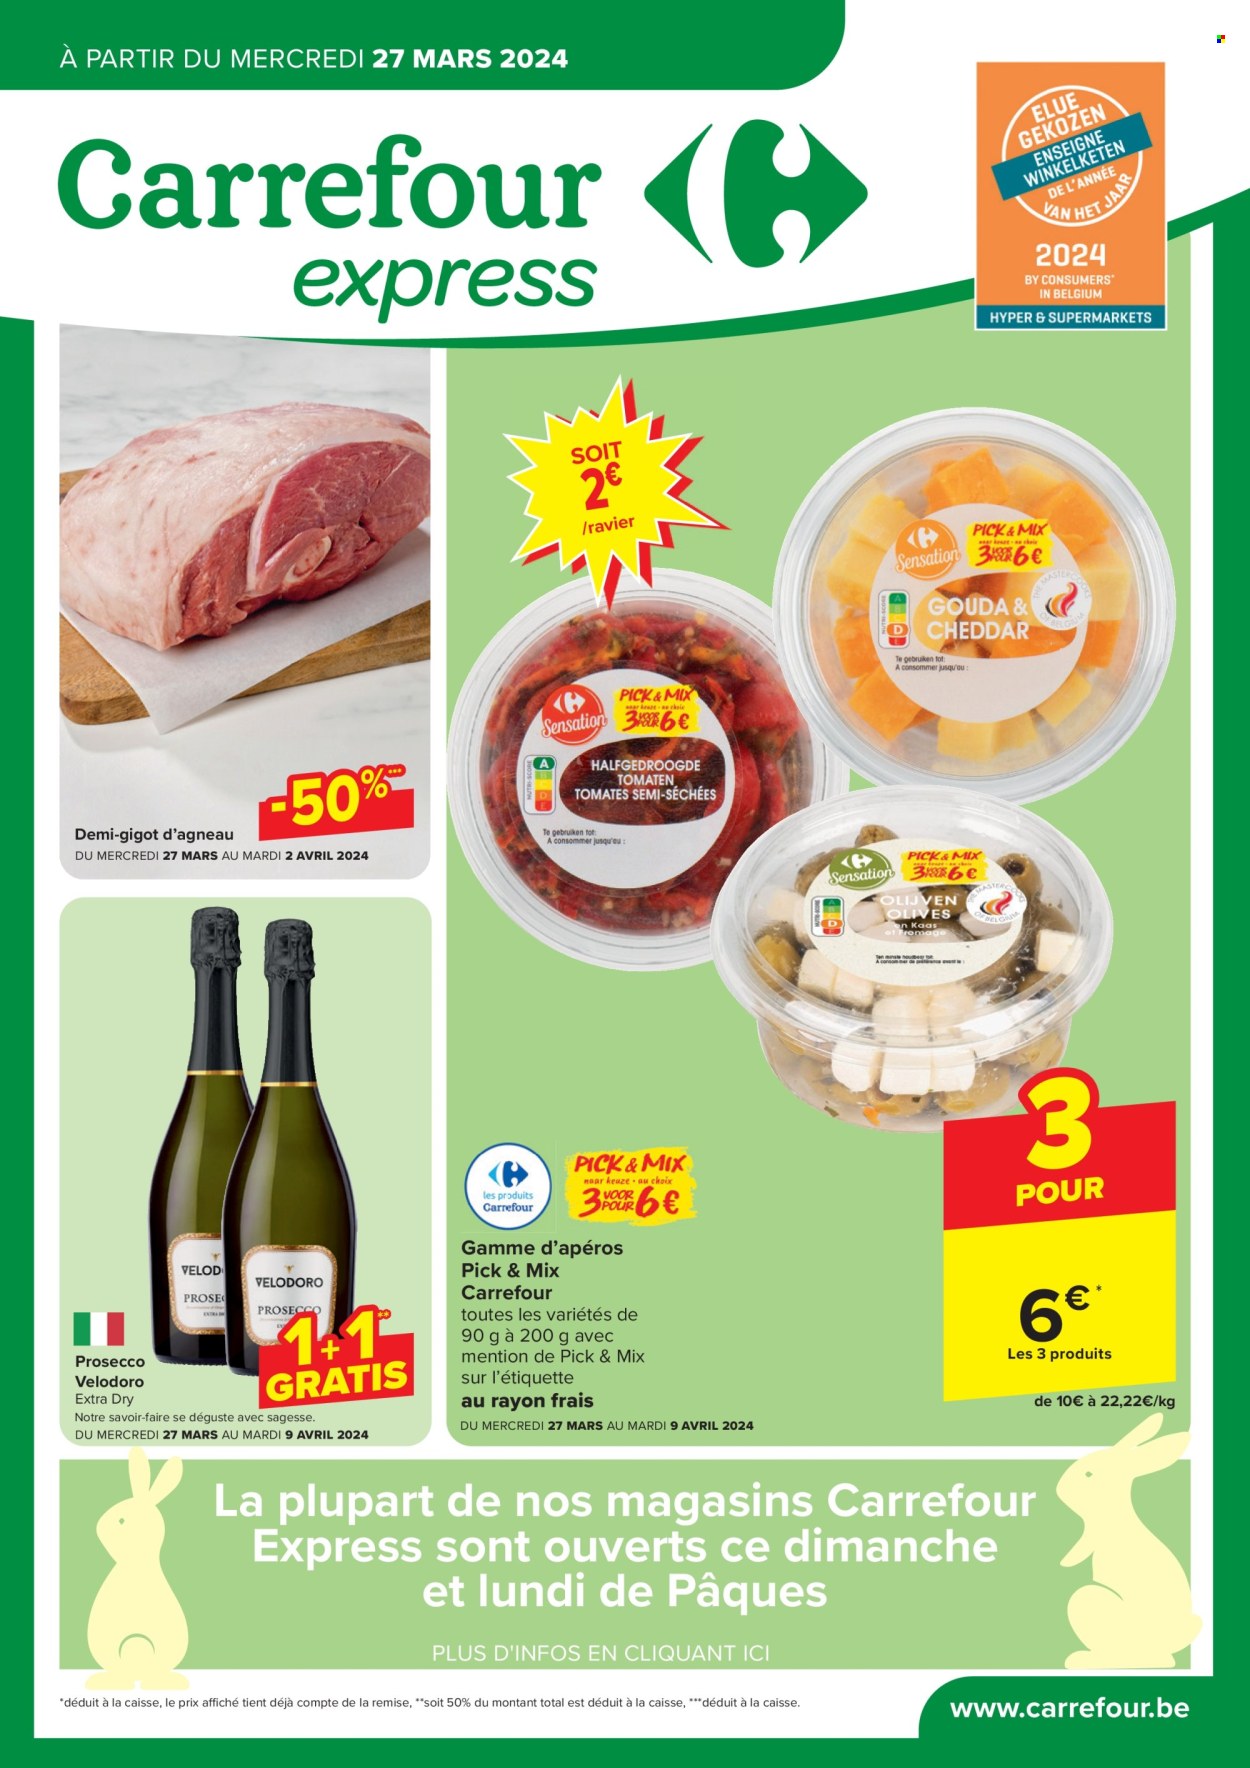 Catalogue Carrefour express - 27.3.2024 - 2.4.2024. Page 1.